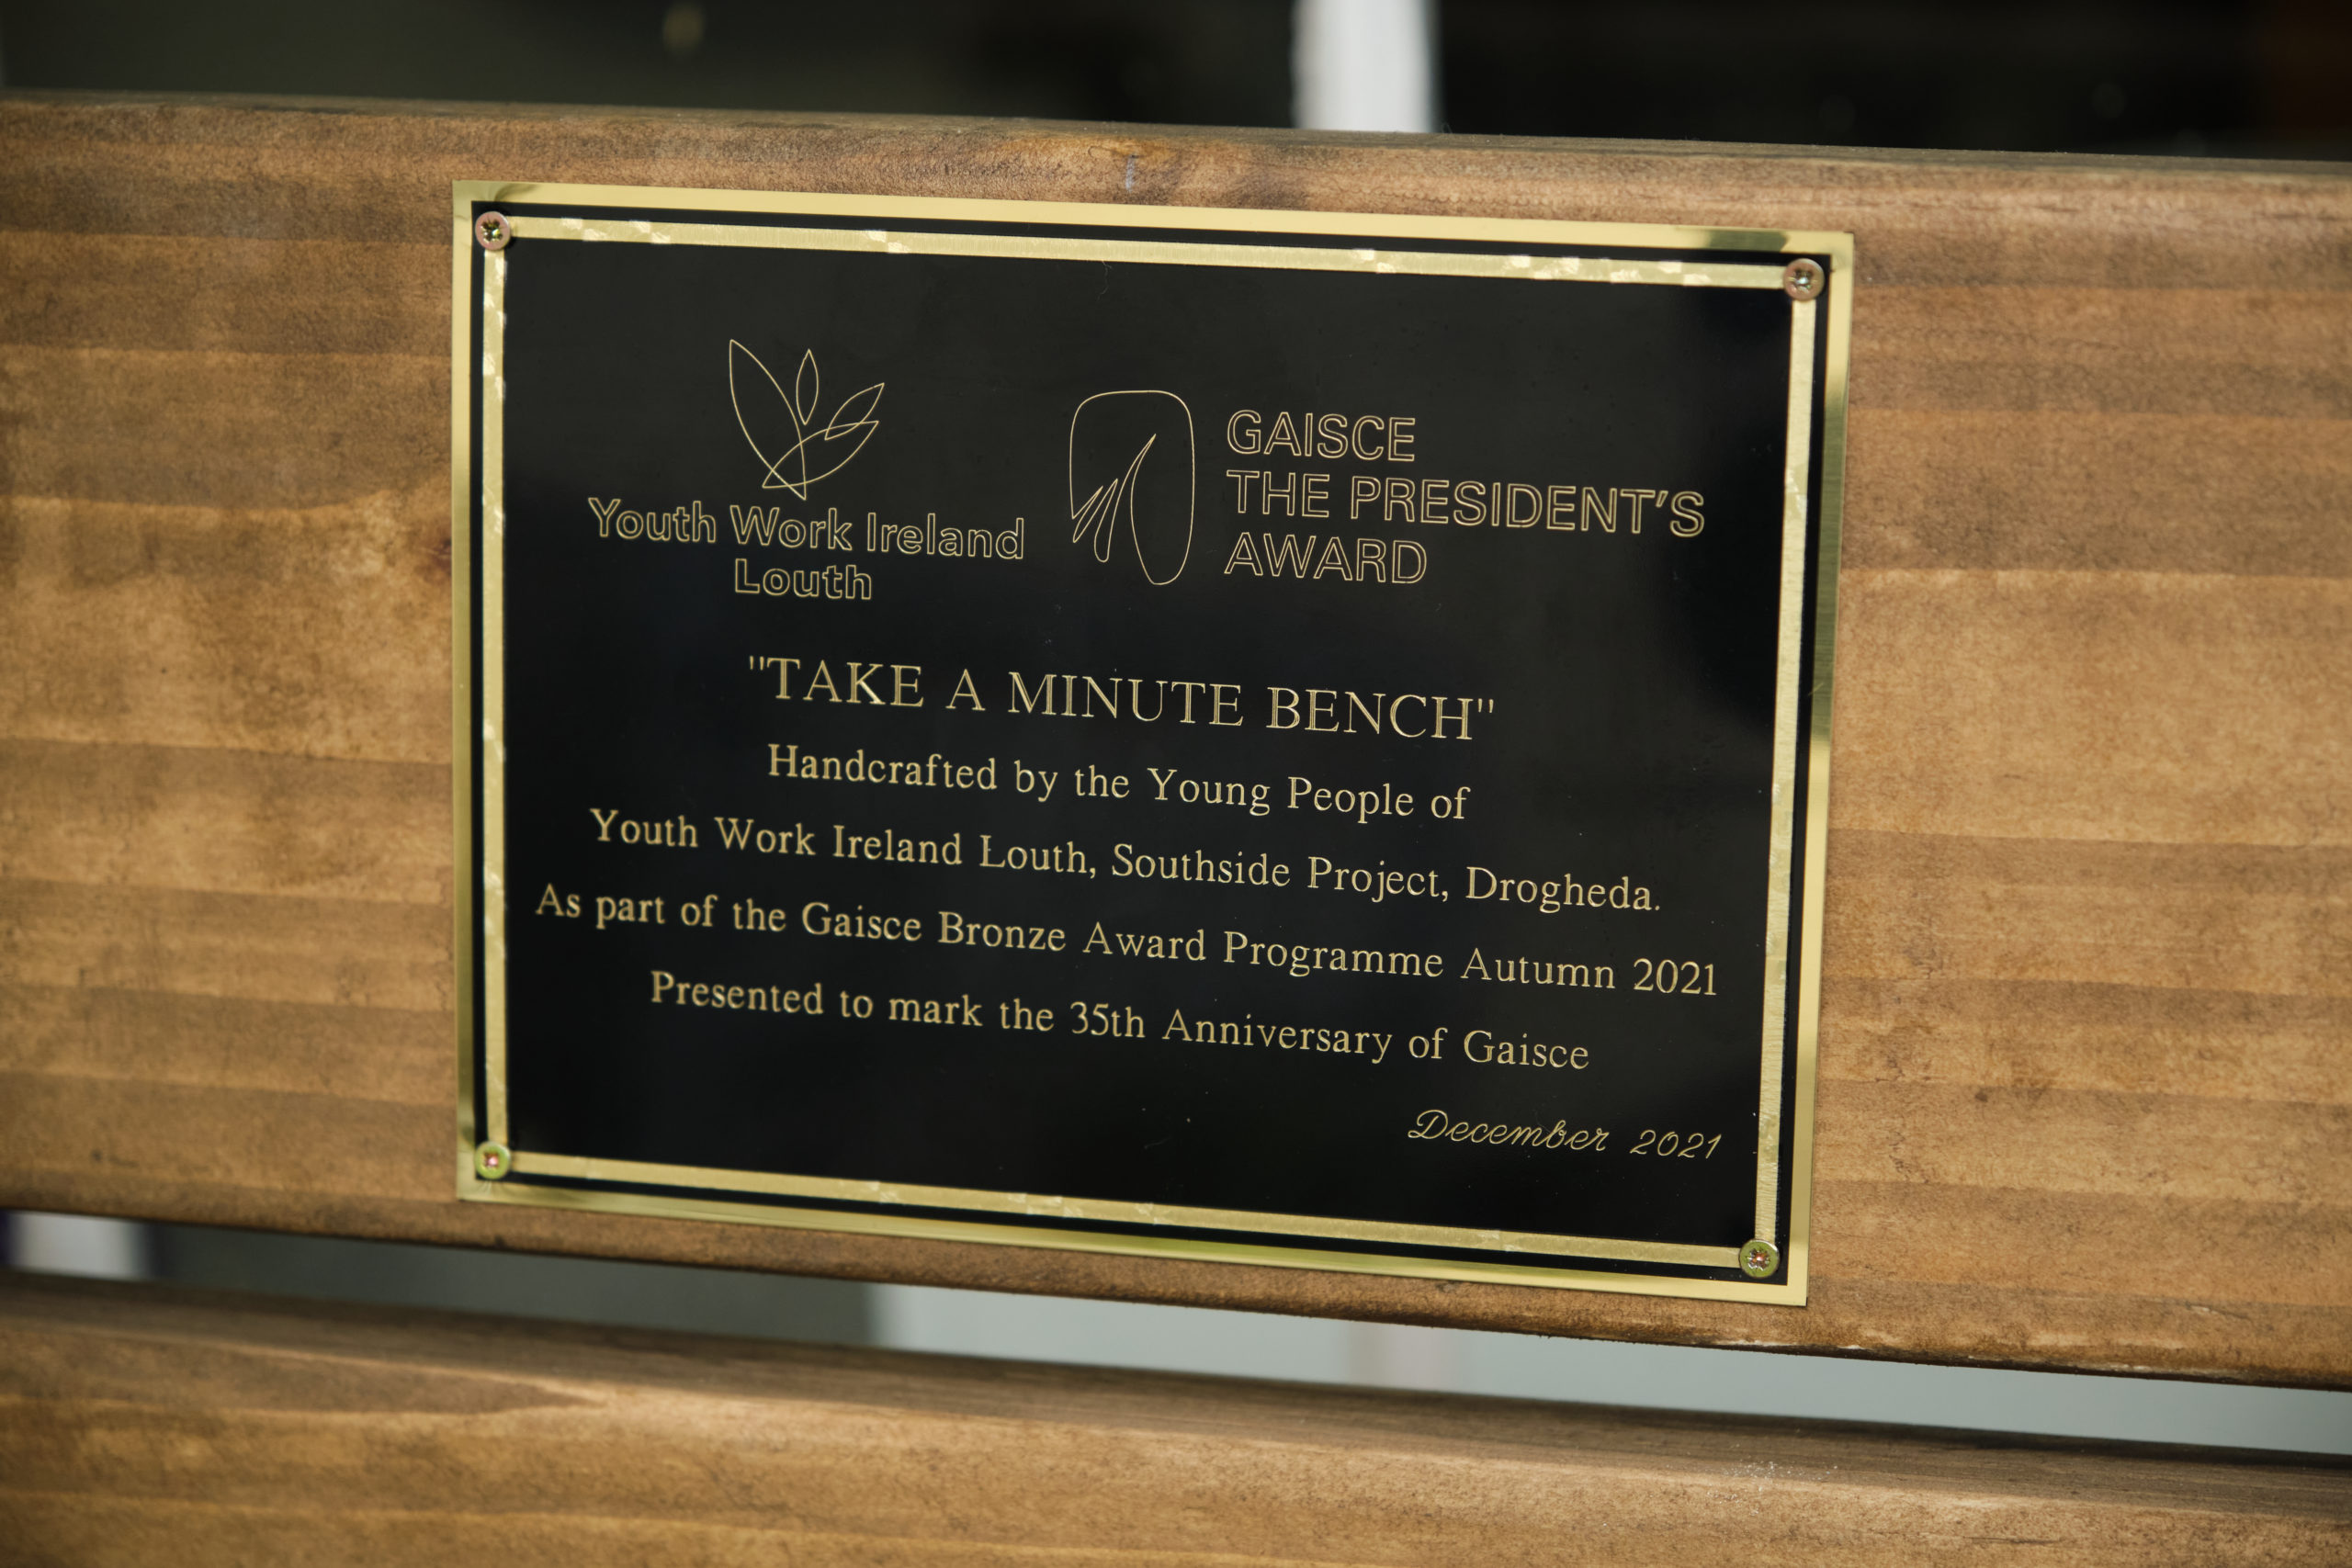 The Just a Minute bench was created by Youth Work Ireland Louth participants